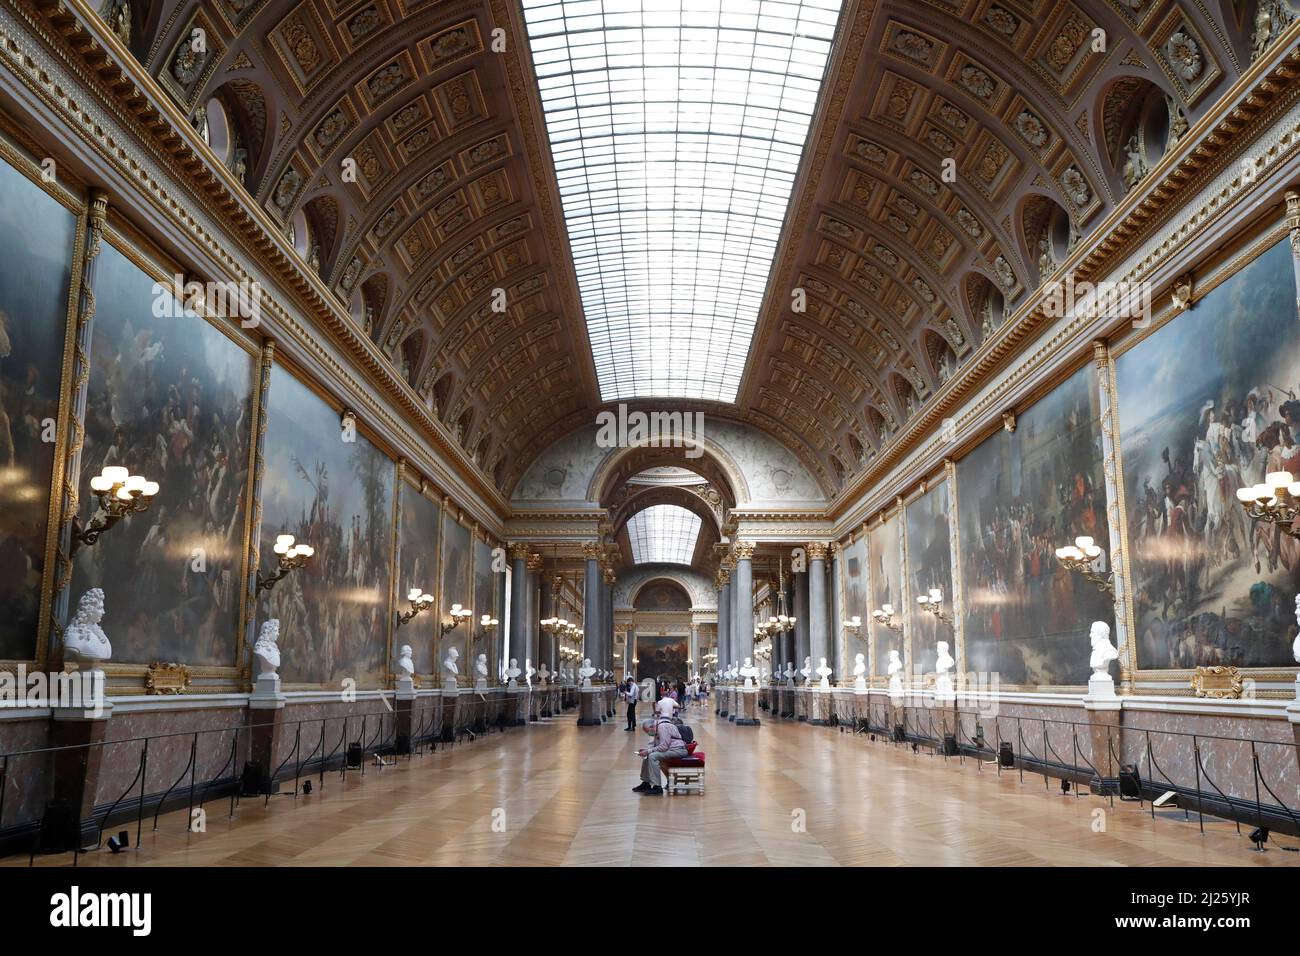 The Galerie des Batailles in the Palace of Versailles. Stock Photo